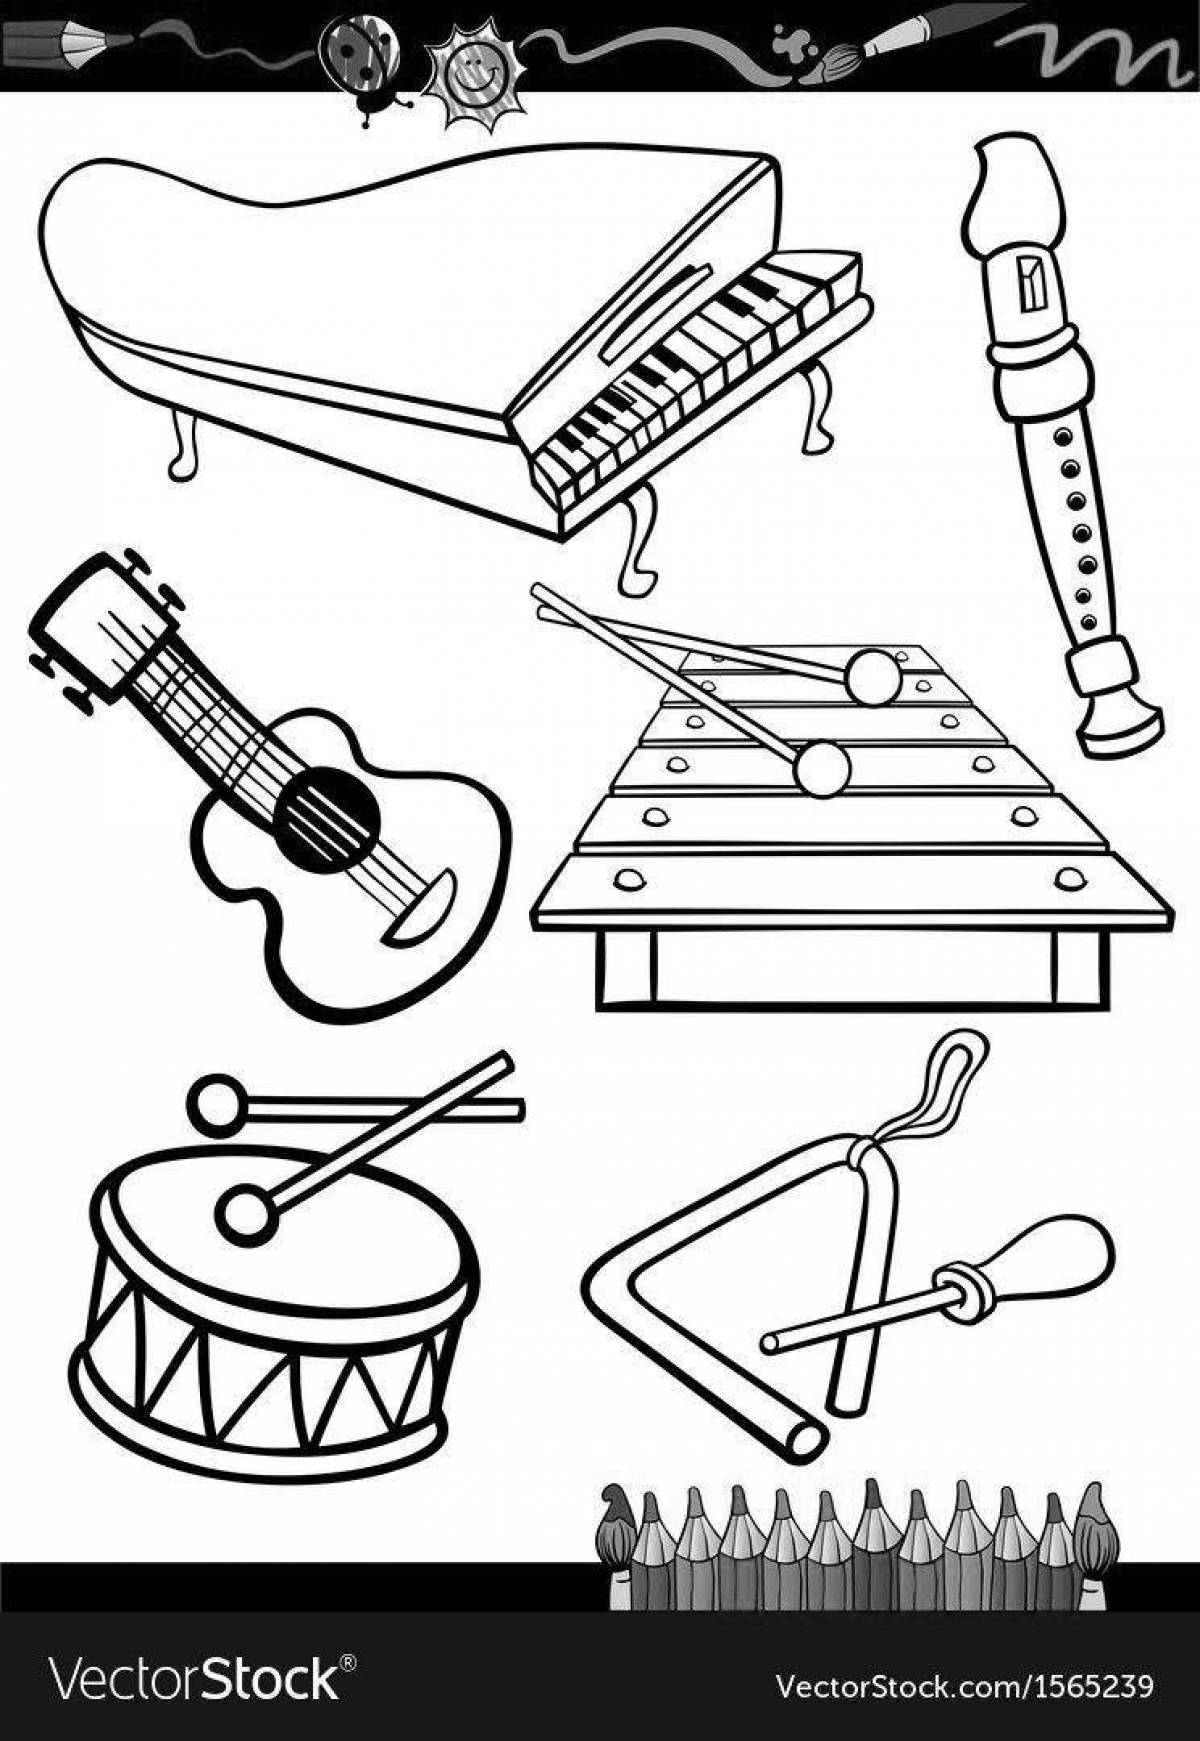 Colorful coloring pages with Russian folk instruments for children